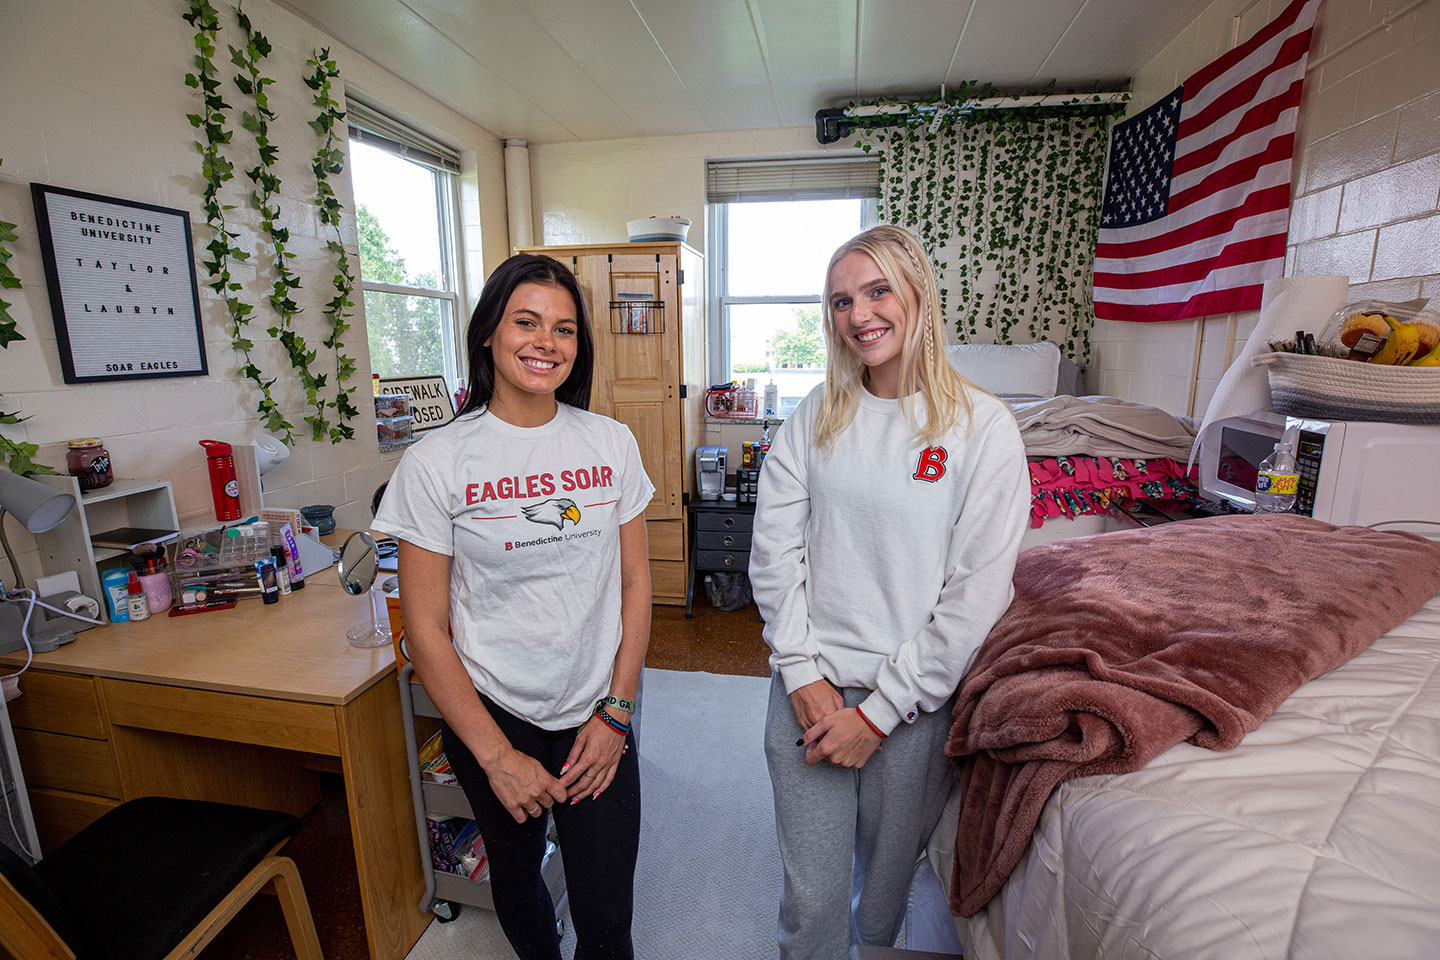 Two women standing in front of a bed in a dorm room.